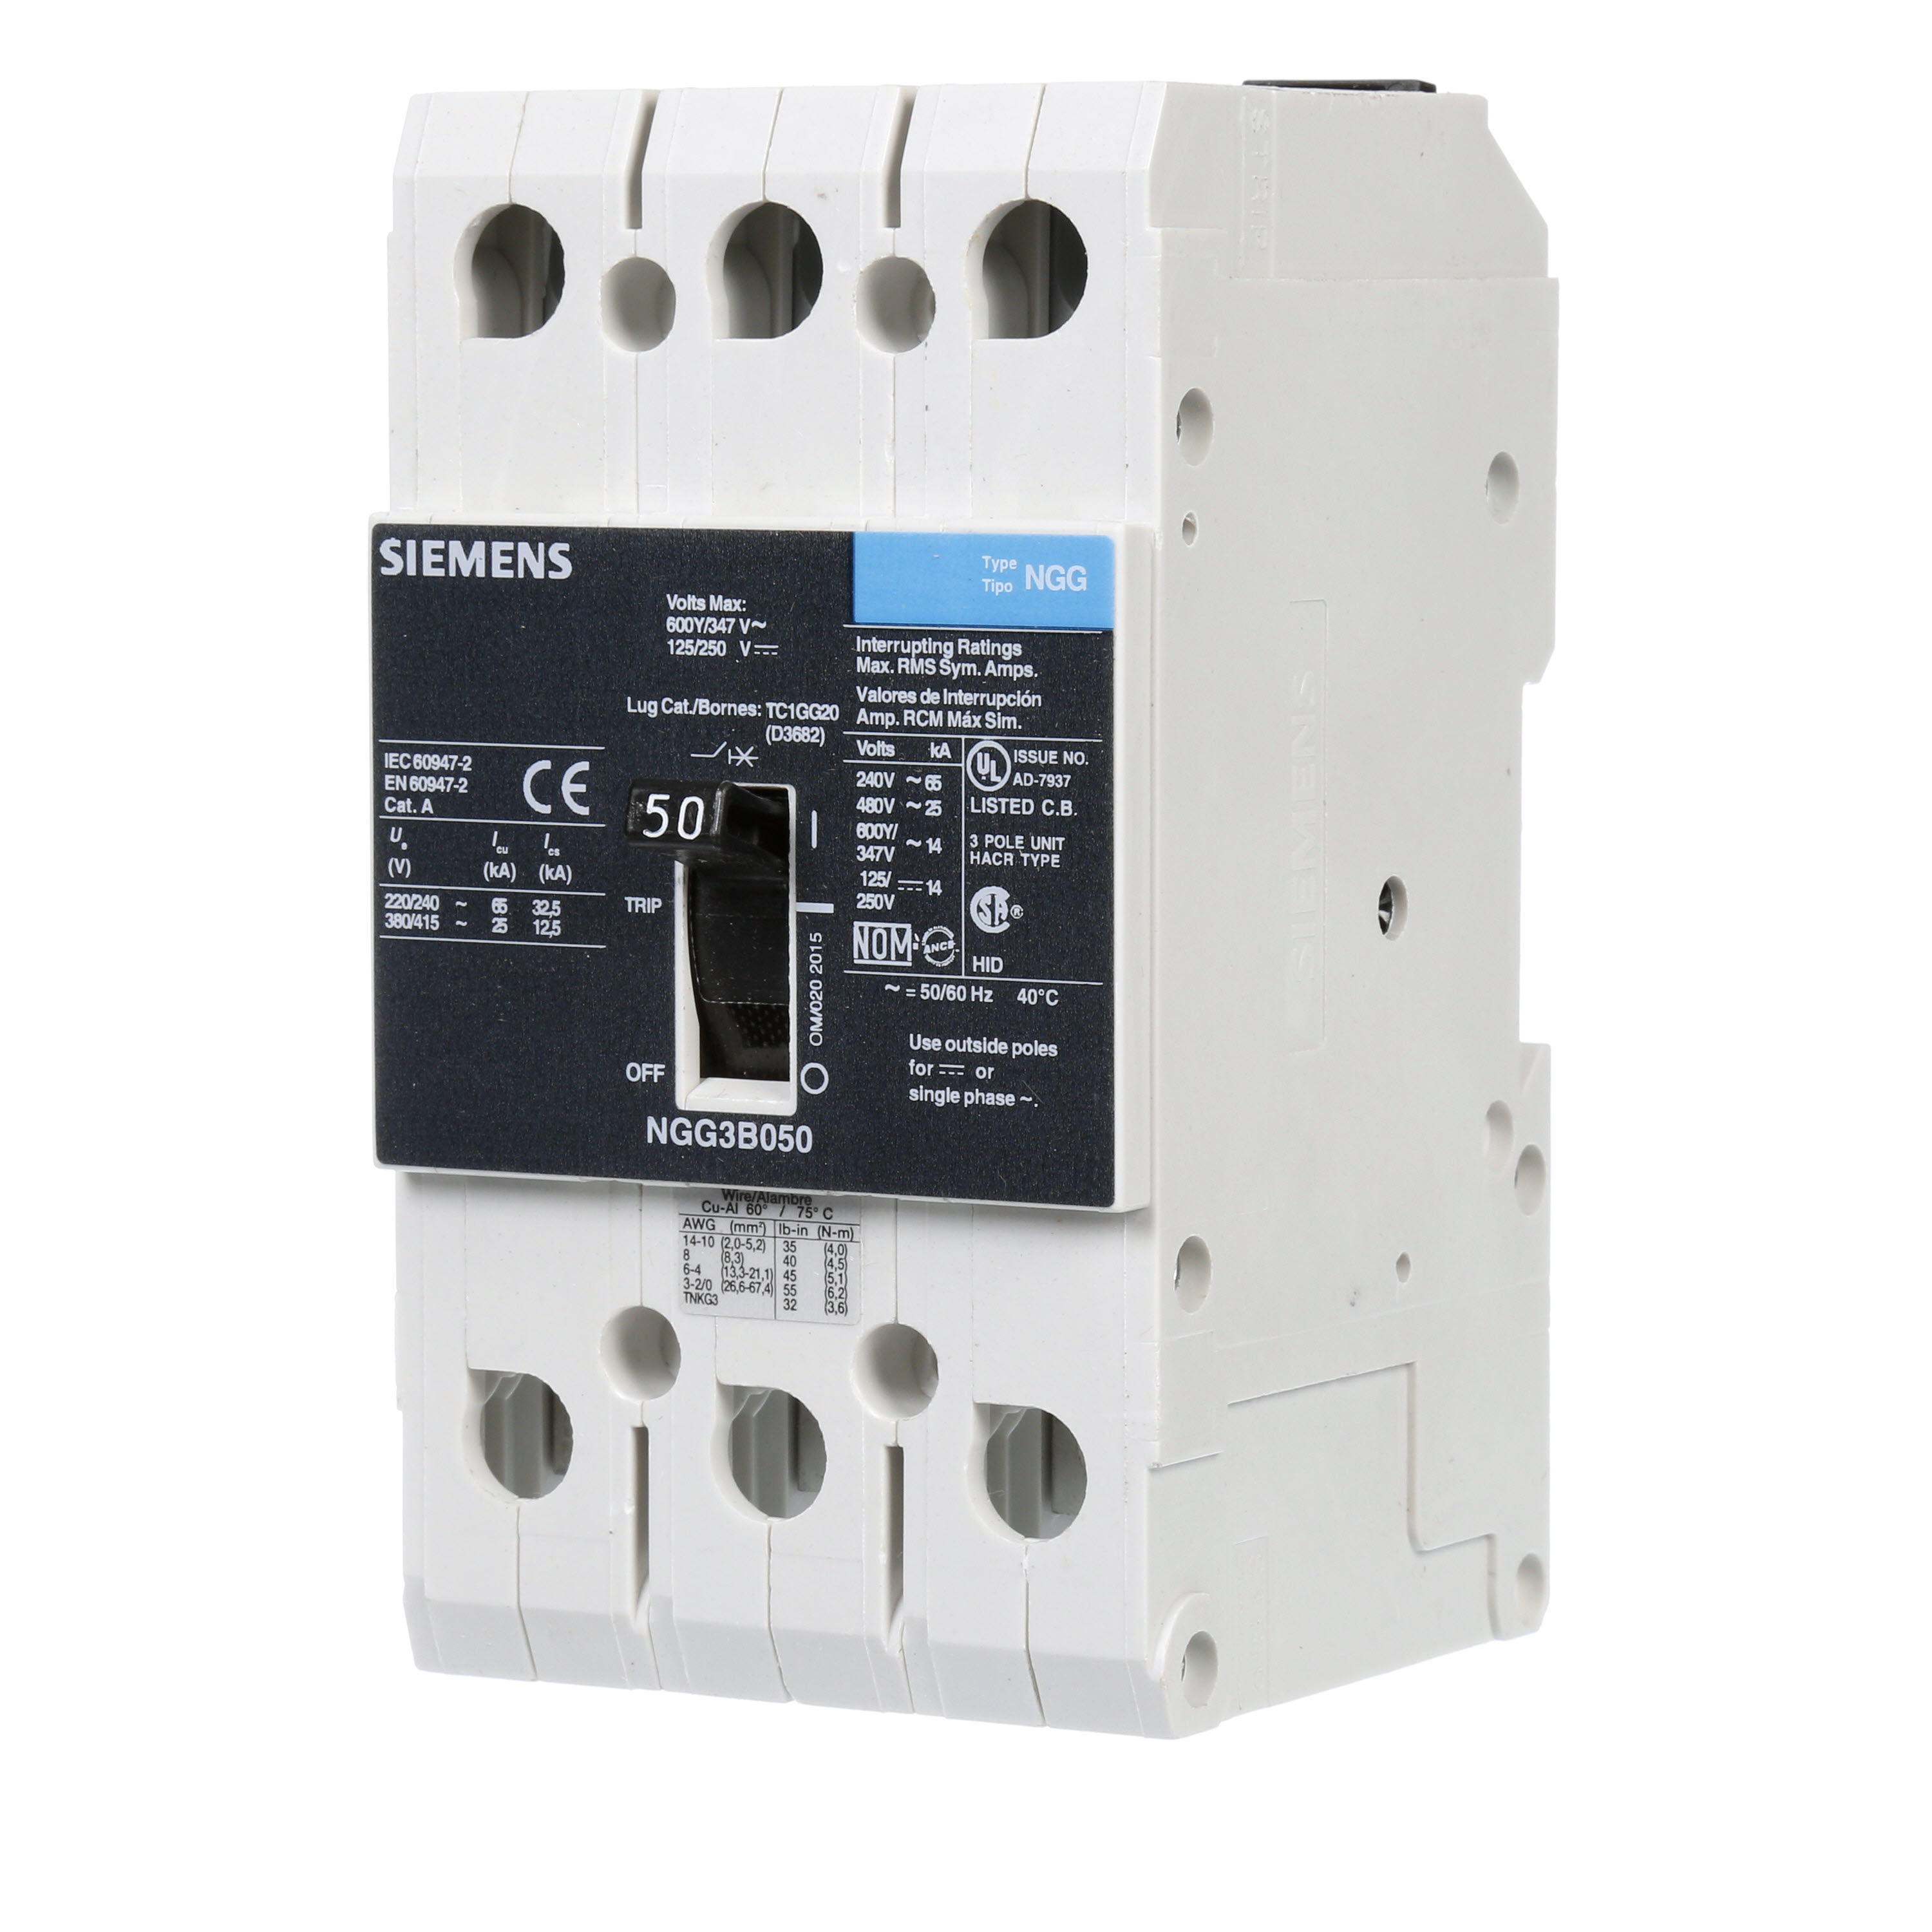 SIEMENS LOW VOLTAGE G FRAME CIRCUIT BREAKER WITH THERMAL - MAGNETIC TRIP. UL LISTED NGG FRAME WITH STANDARD BREAKING CAPACITY. 50A 3-POLE (14KAIC AT 600Y/347V)(25KAIC AT 480V). SPECIAL FEATURES MOUNTS ON DIN RAIL / SCREW, LINE AND LOAD SIDE LUGS (TC1GG20) WIRE RANGE 8 - 1/0 AWS (CU/AL). DIMENSIONS (W x H x D) IN 3 x 5.4 x 2.8.